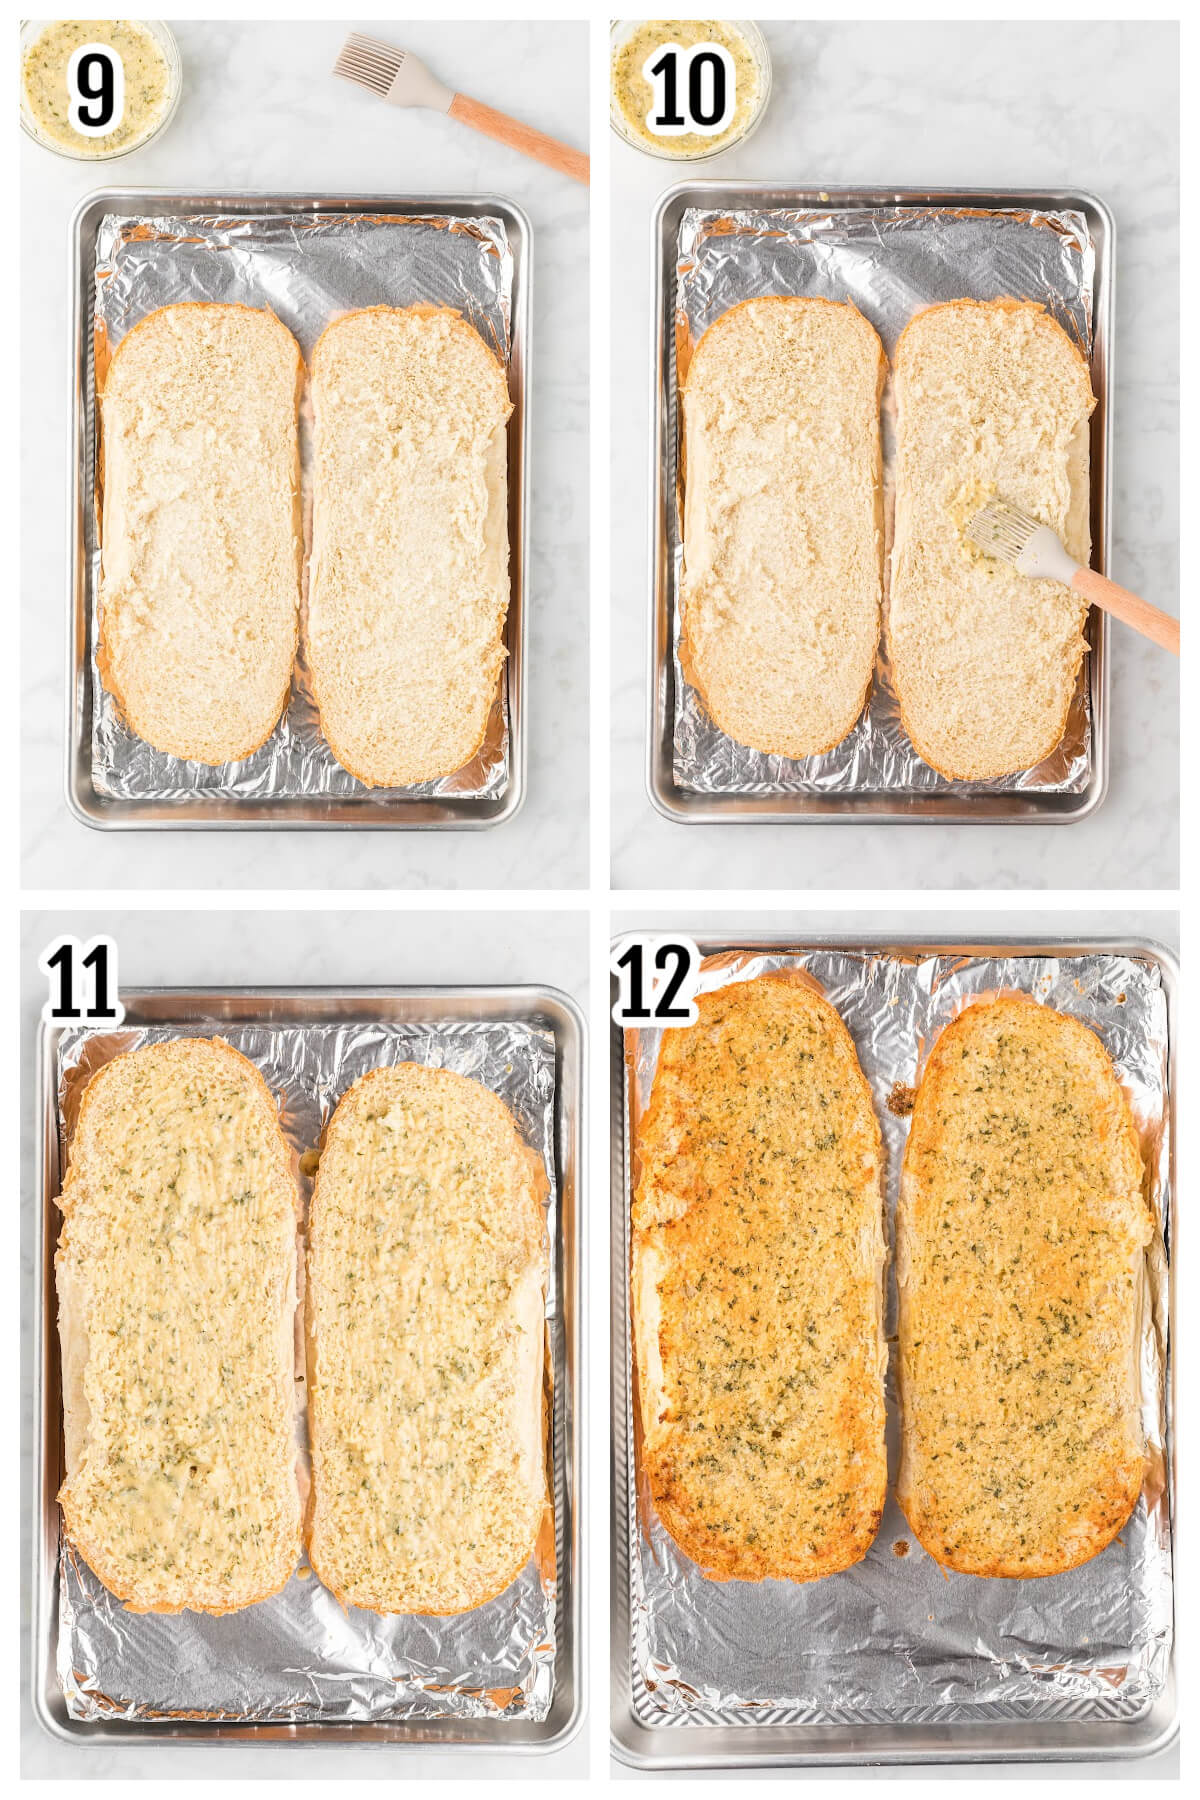 Third and final set of steps to making garlic bread. 